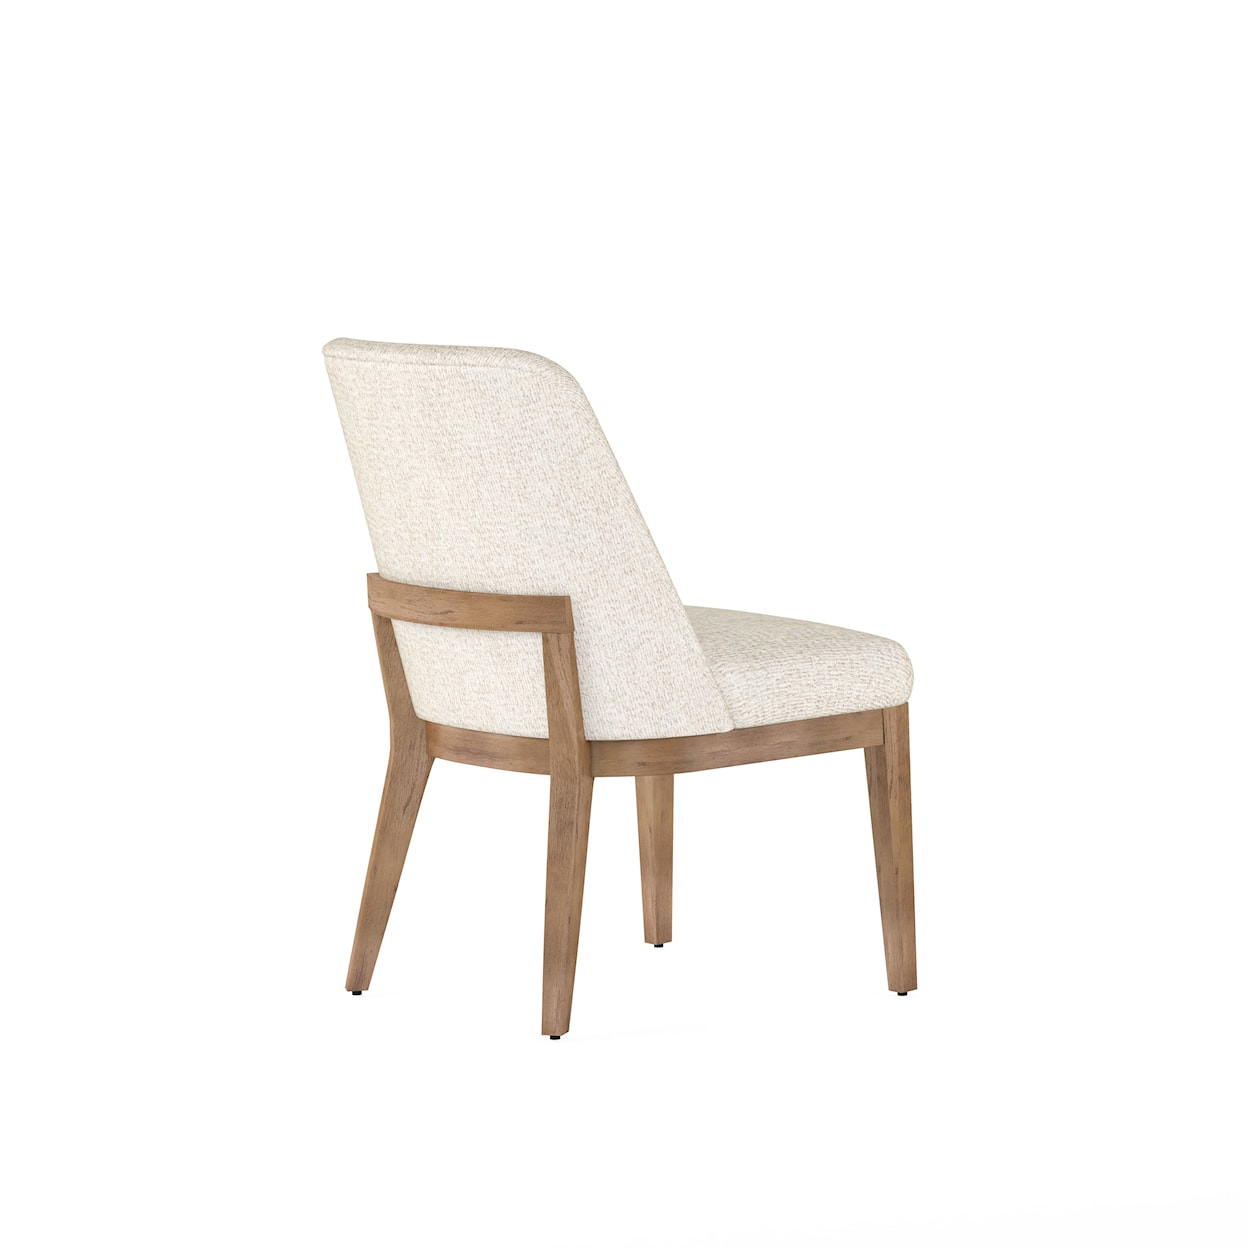 A.R.T. Furniture Inc Portico Two-Tone Upholstered Side Chair